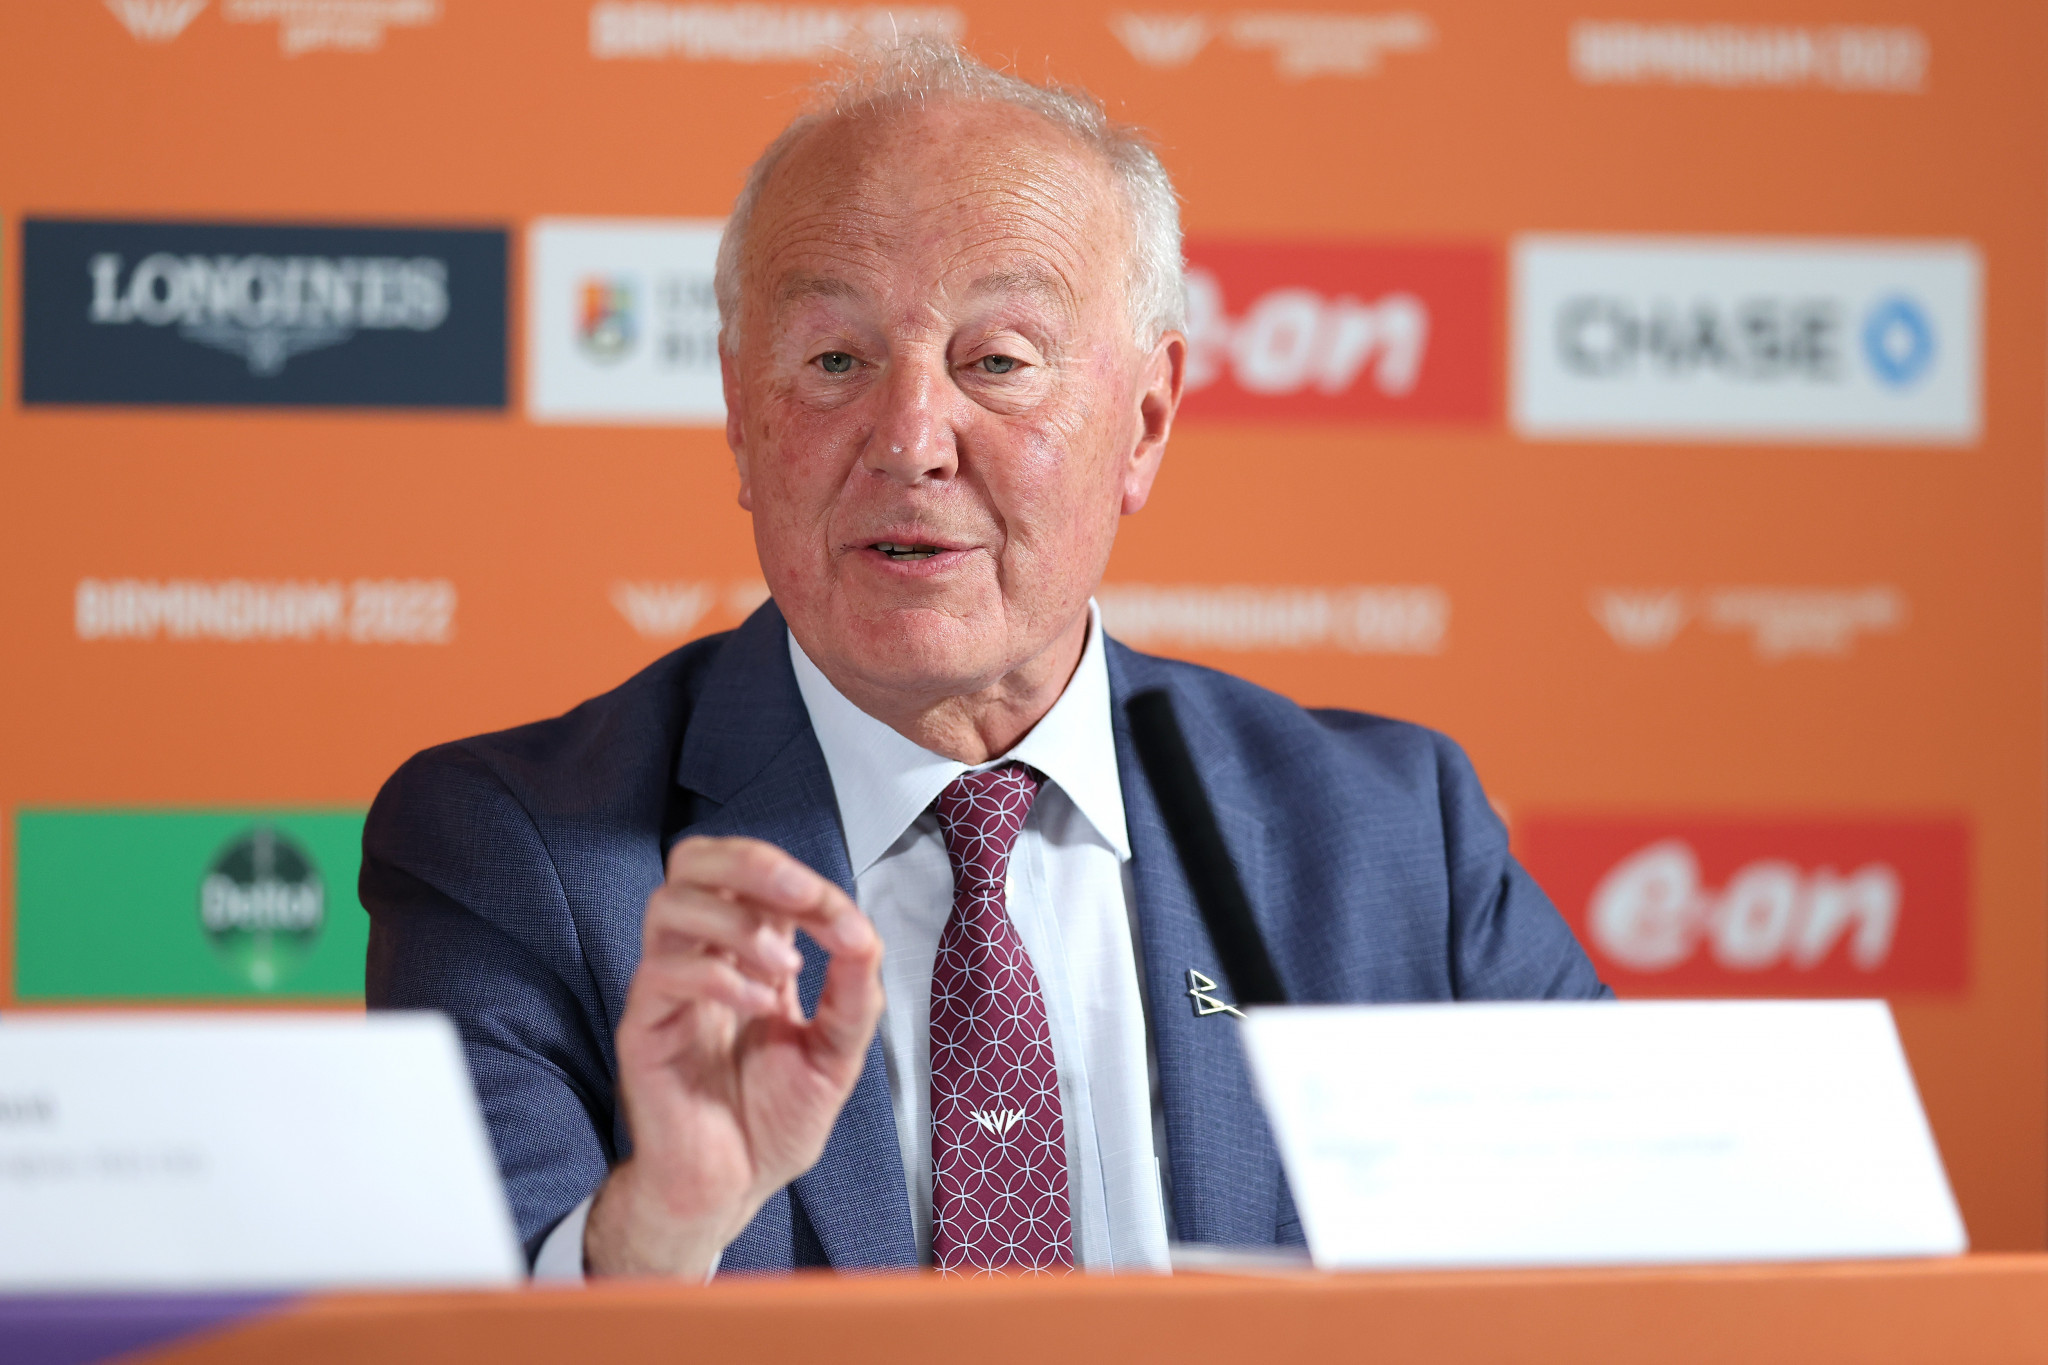 Birmingham 2022 chair John Crabtree believes the organisers' legacy plans will kick into action following the conclusion of the Commonwealth Games ©Getty Images